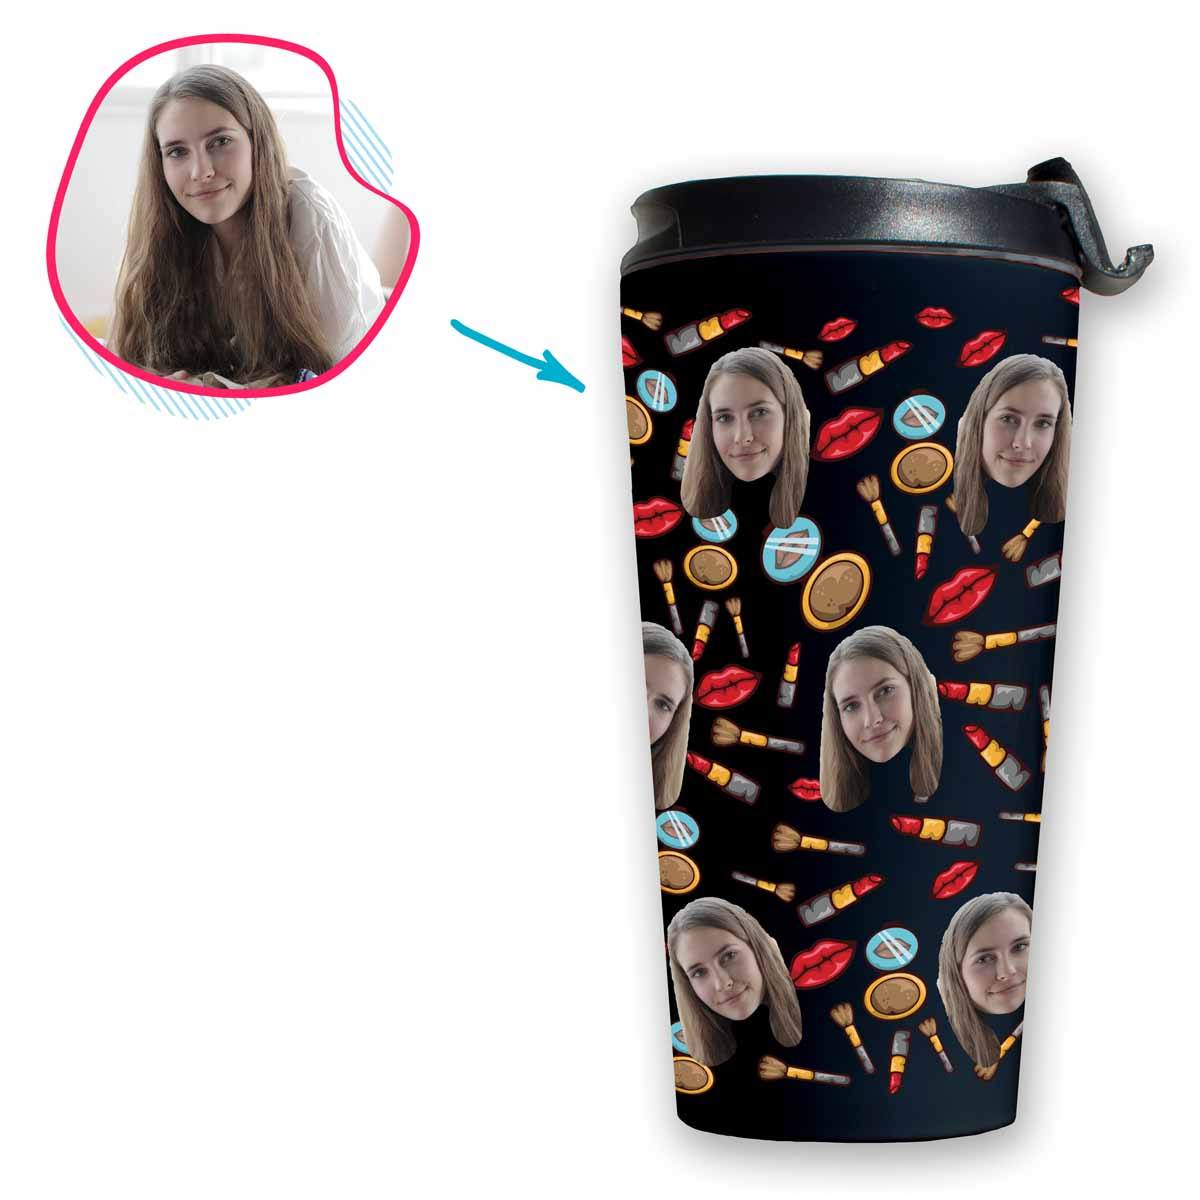 Dark Makeup personalized travel mug with photo of face printed on it